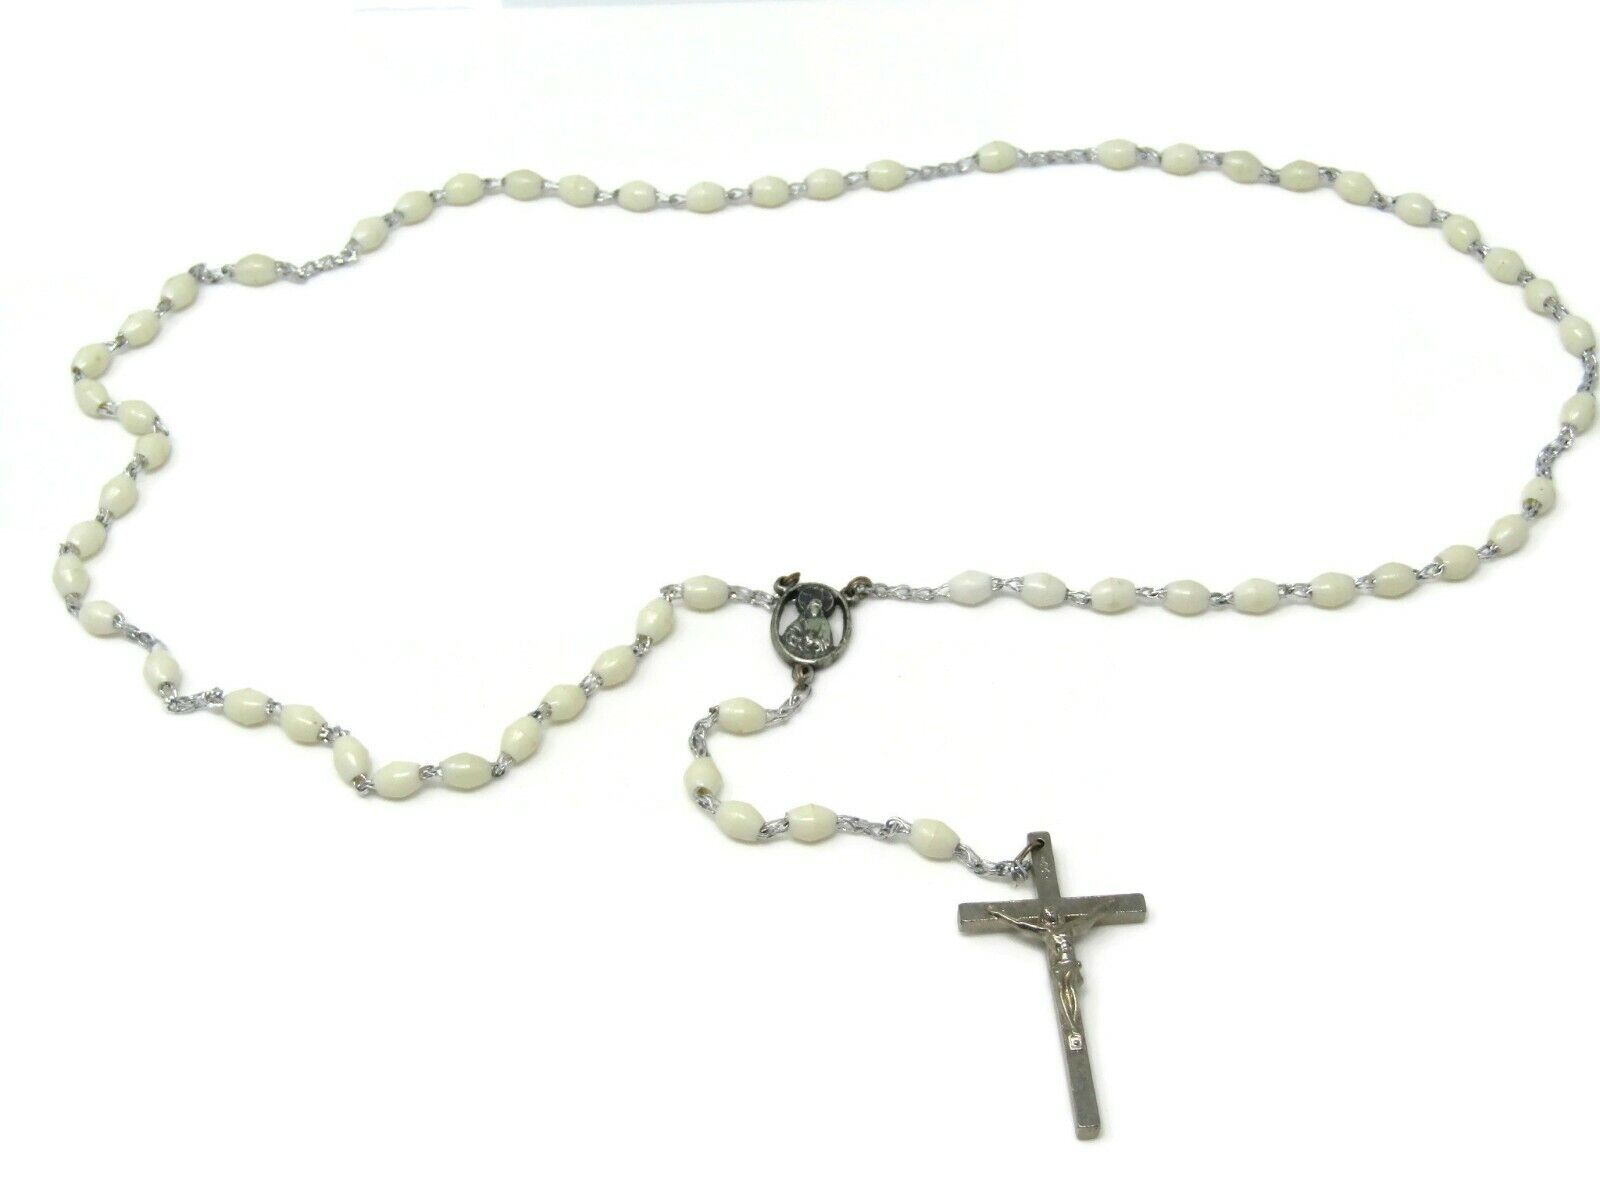 Vintage Crucifix White Beads Beautiful Christian Jewelry Made in Italy